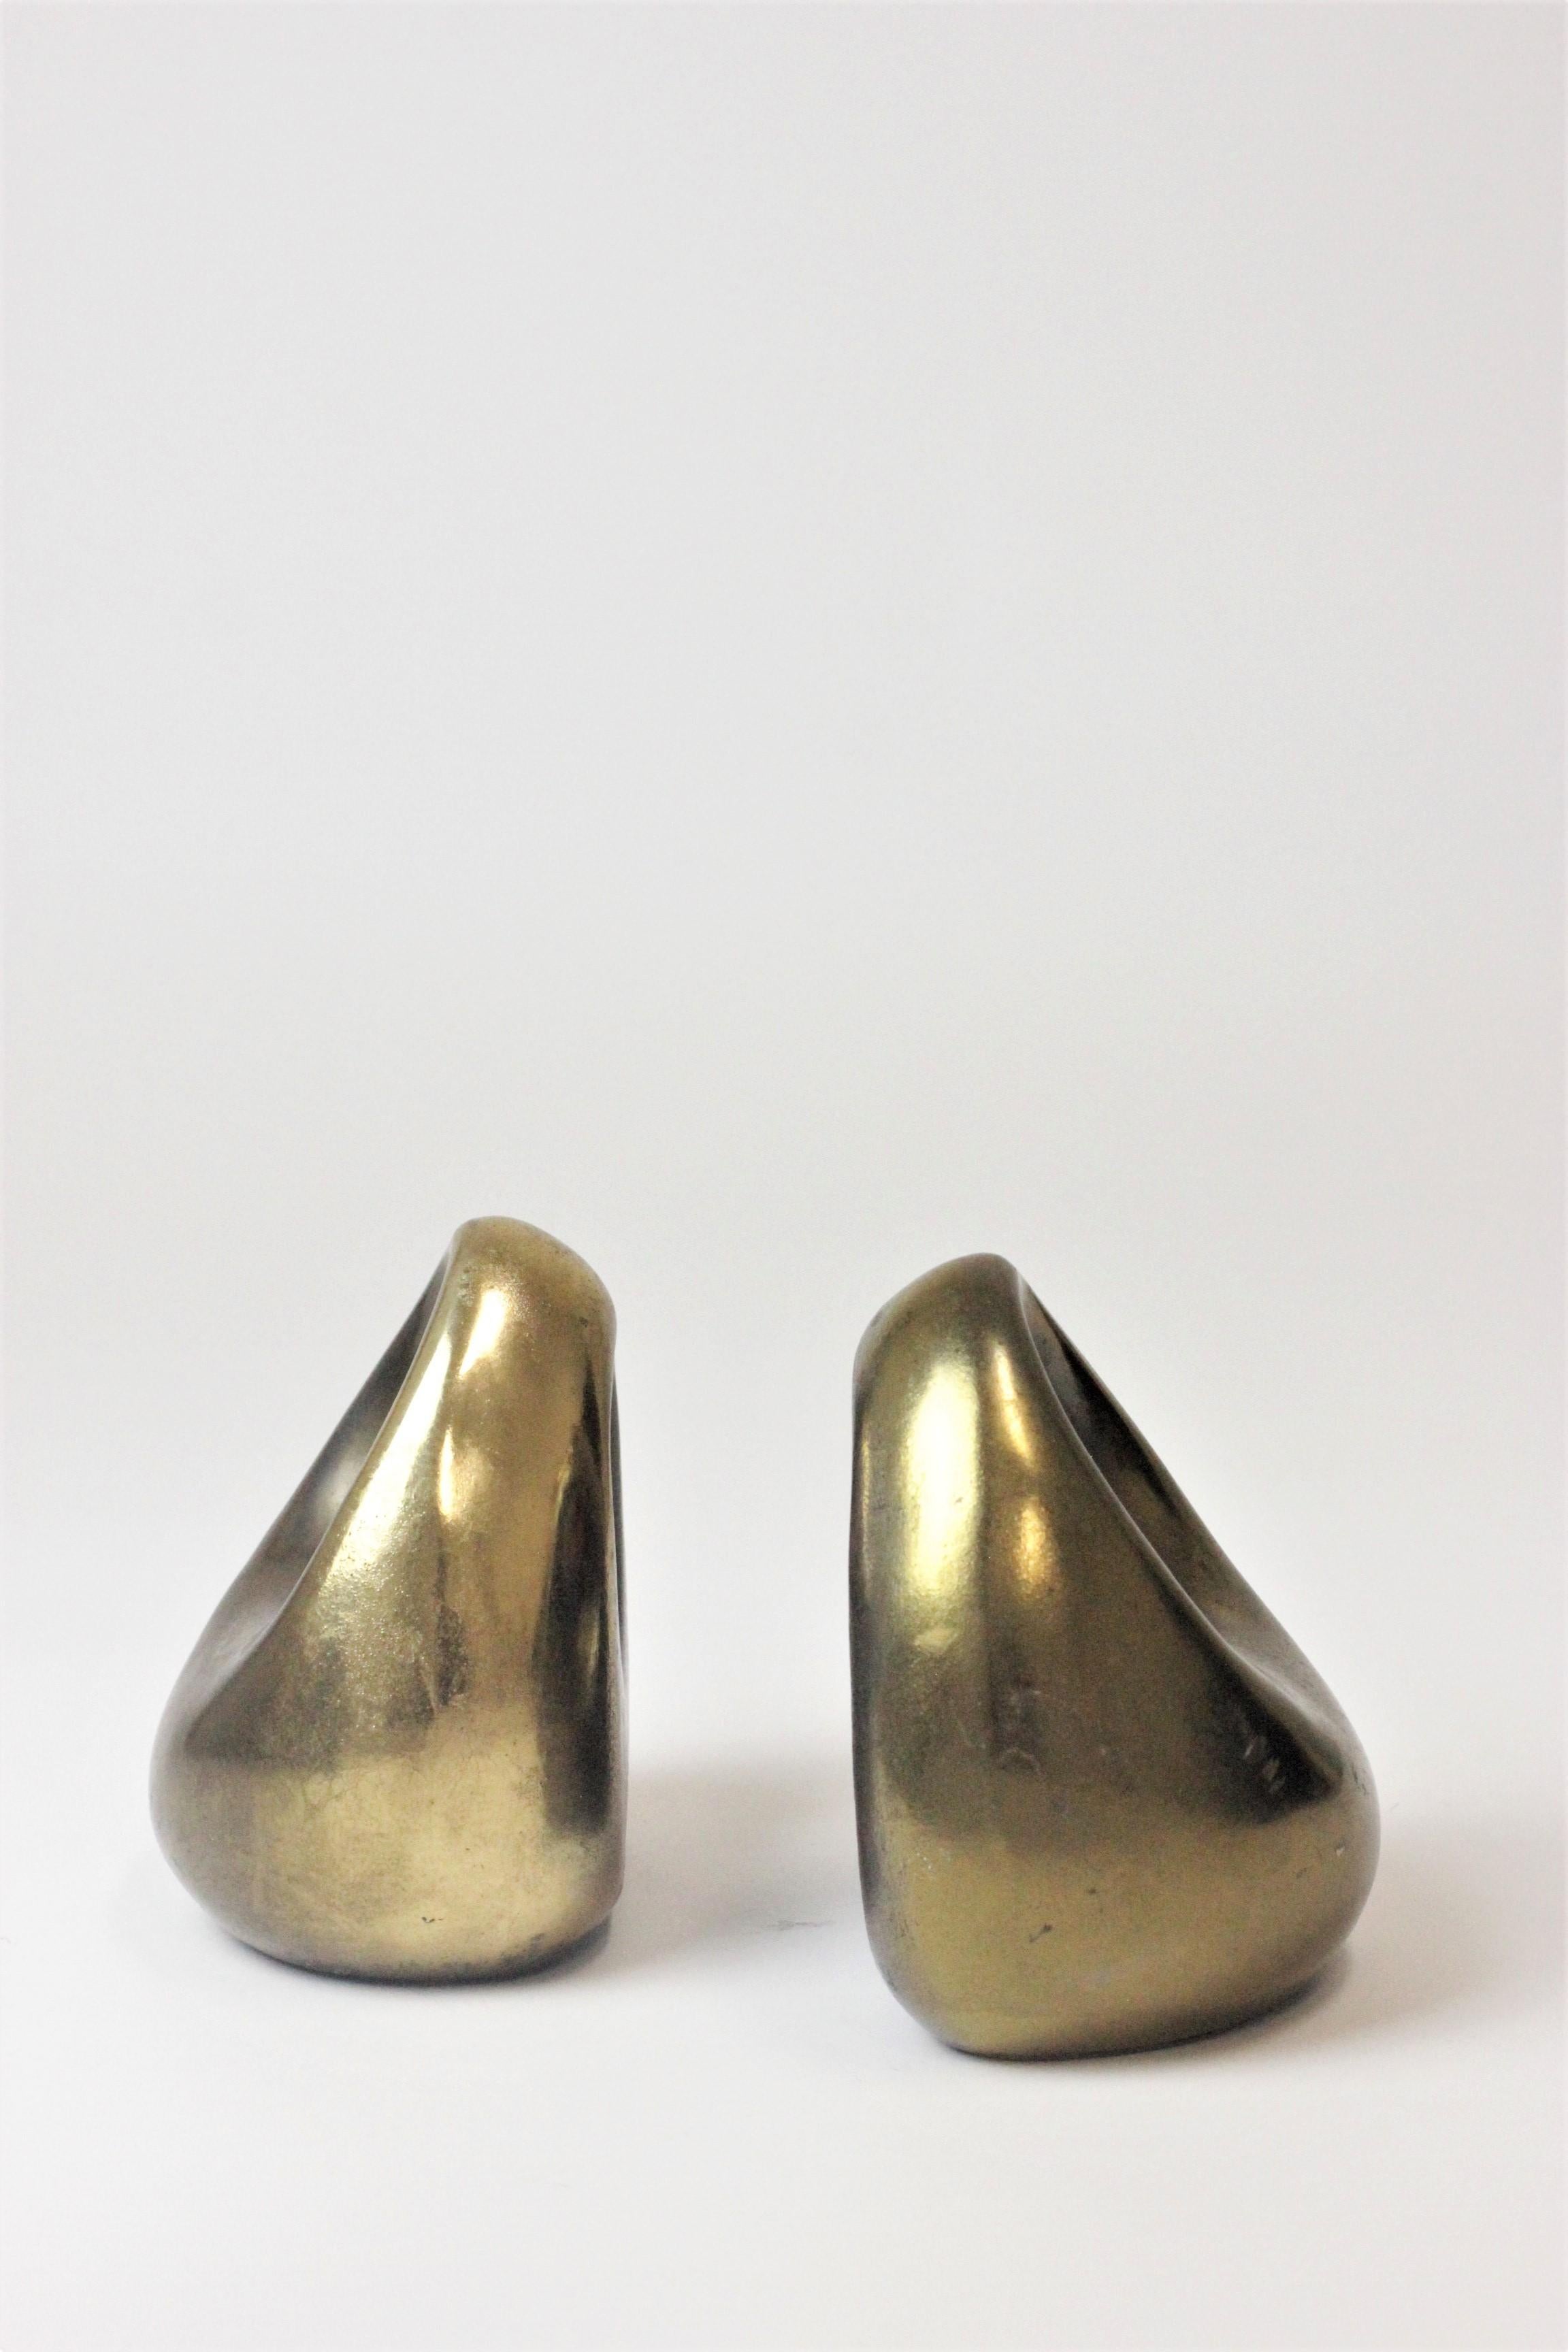 20th Century Ben Seibel for Jenfred-Ware Midcentury Gold Orb Bookends For Sale